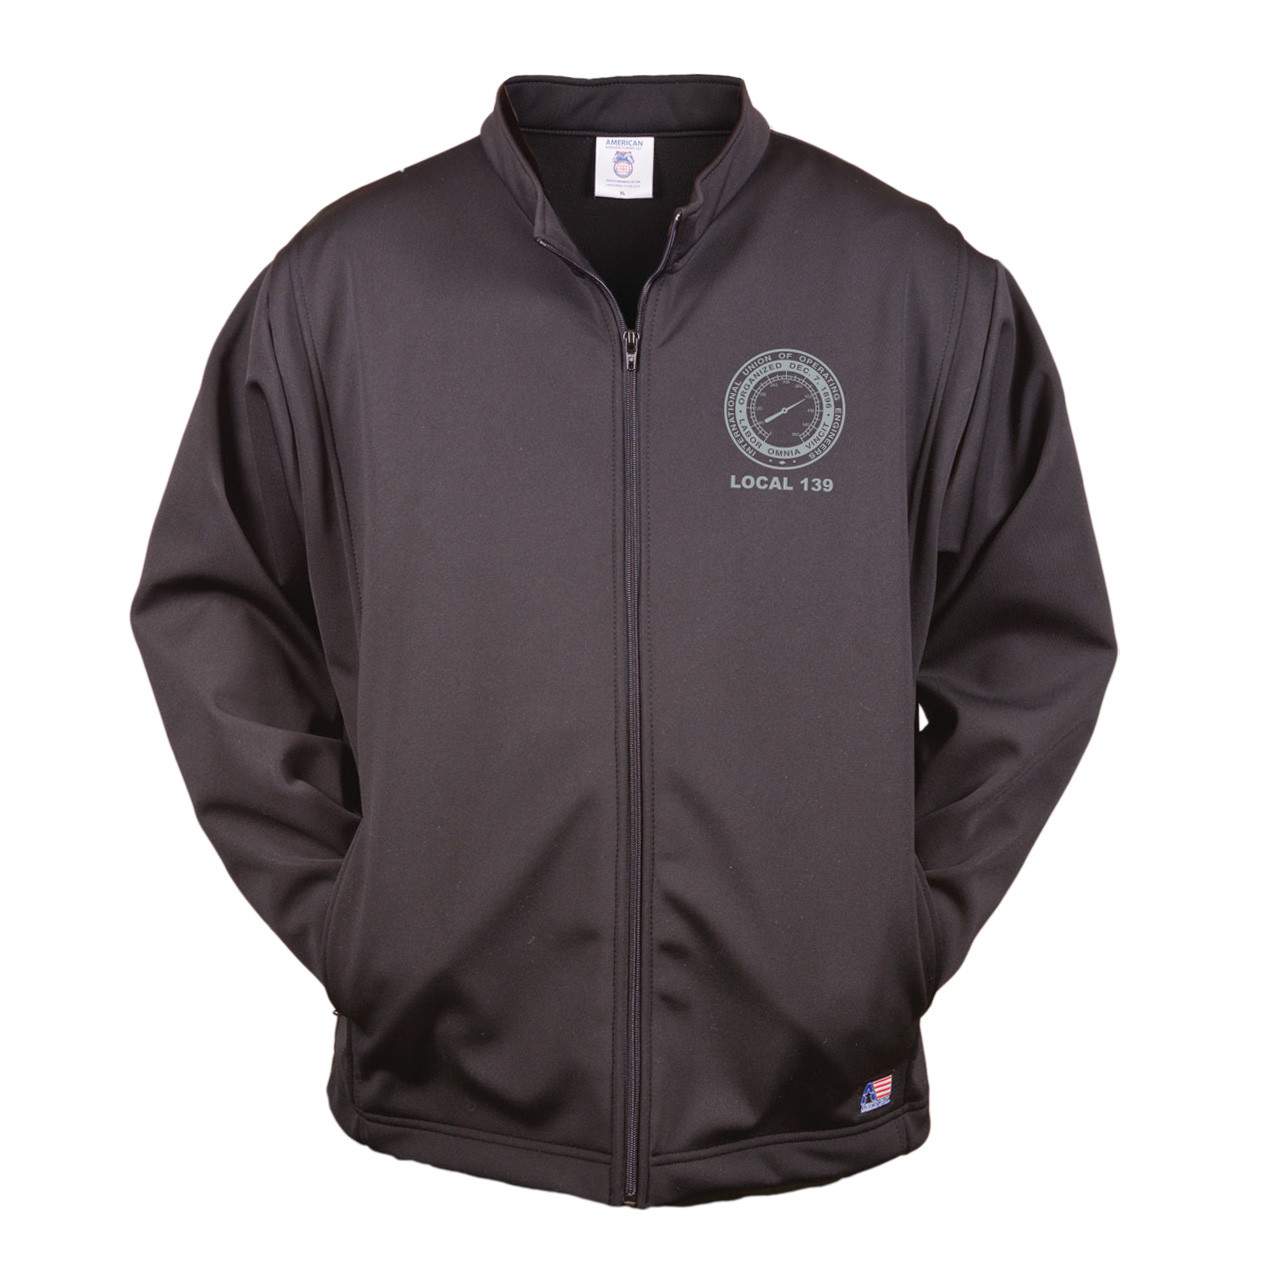 Softshell Jacket with Grey Embroidery - 139 Engineer Gear